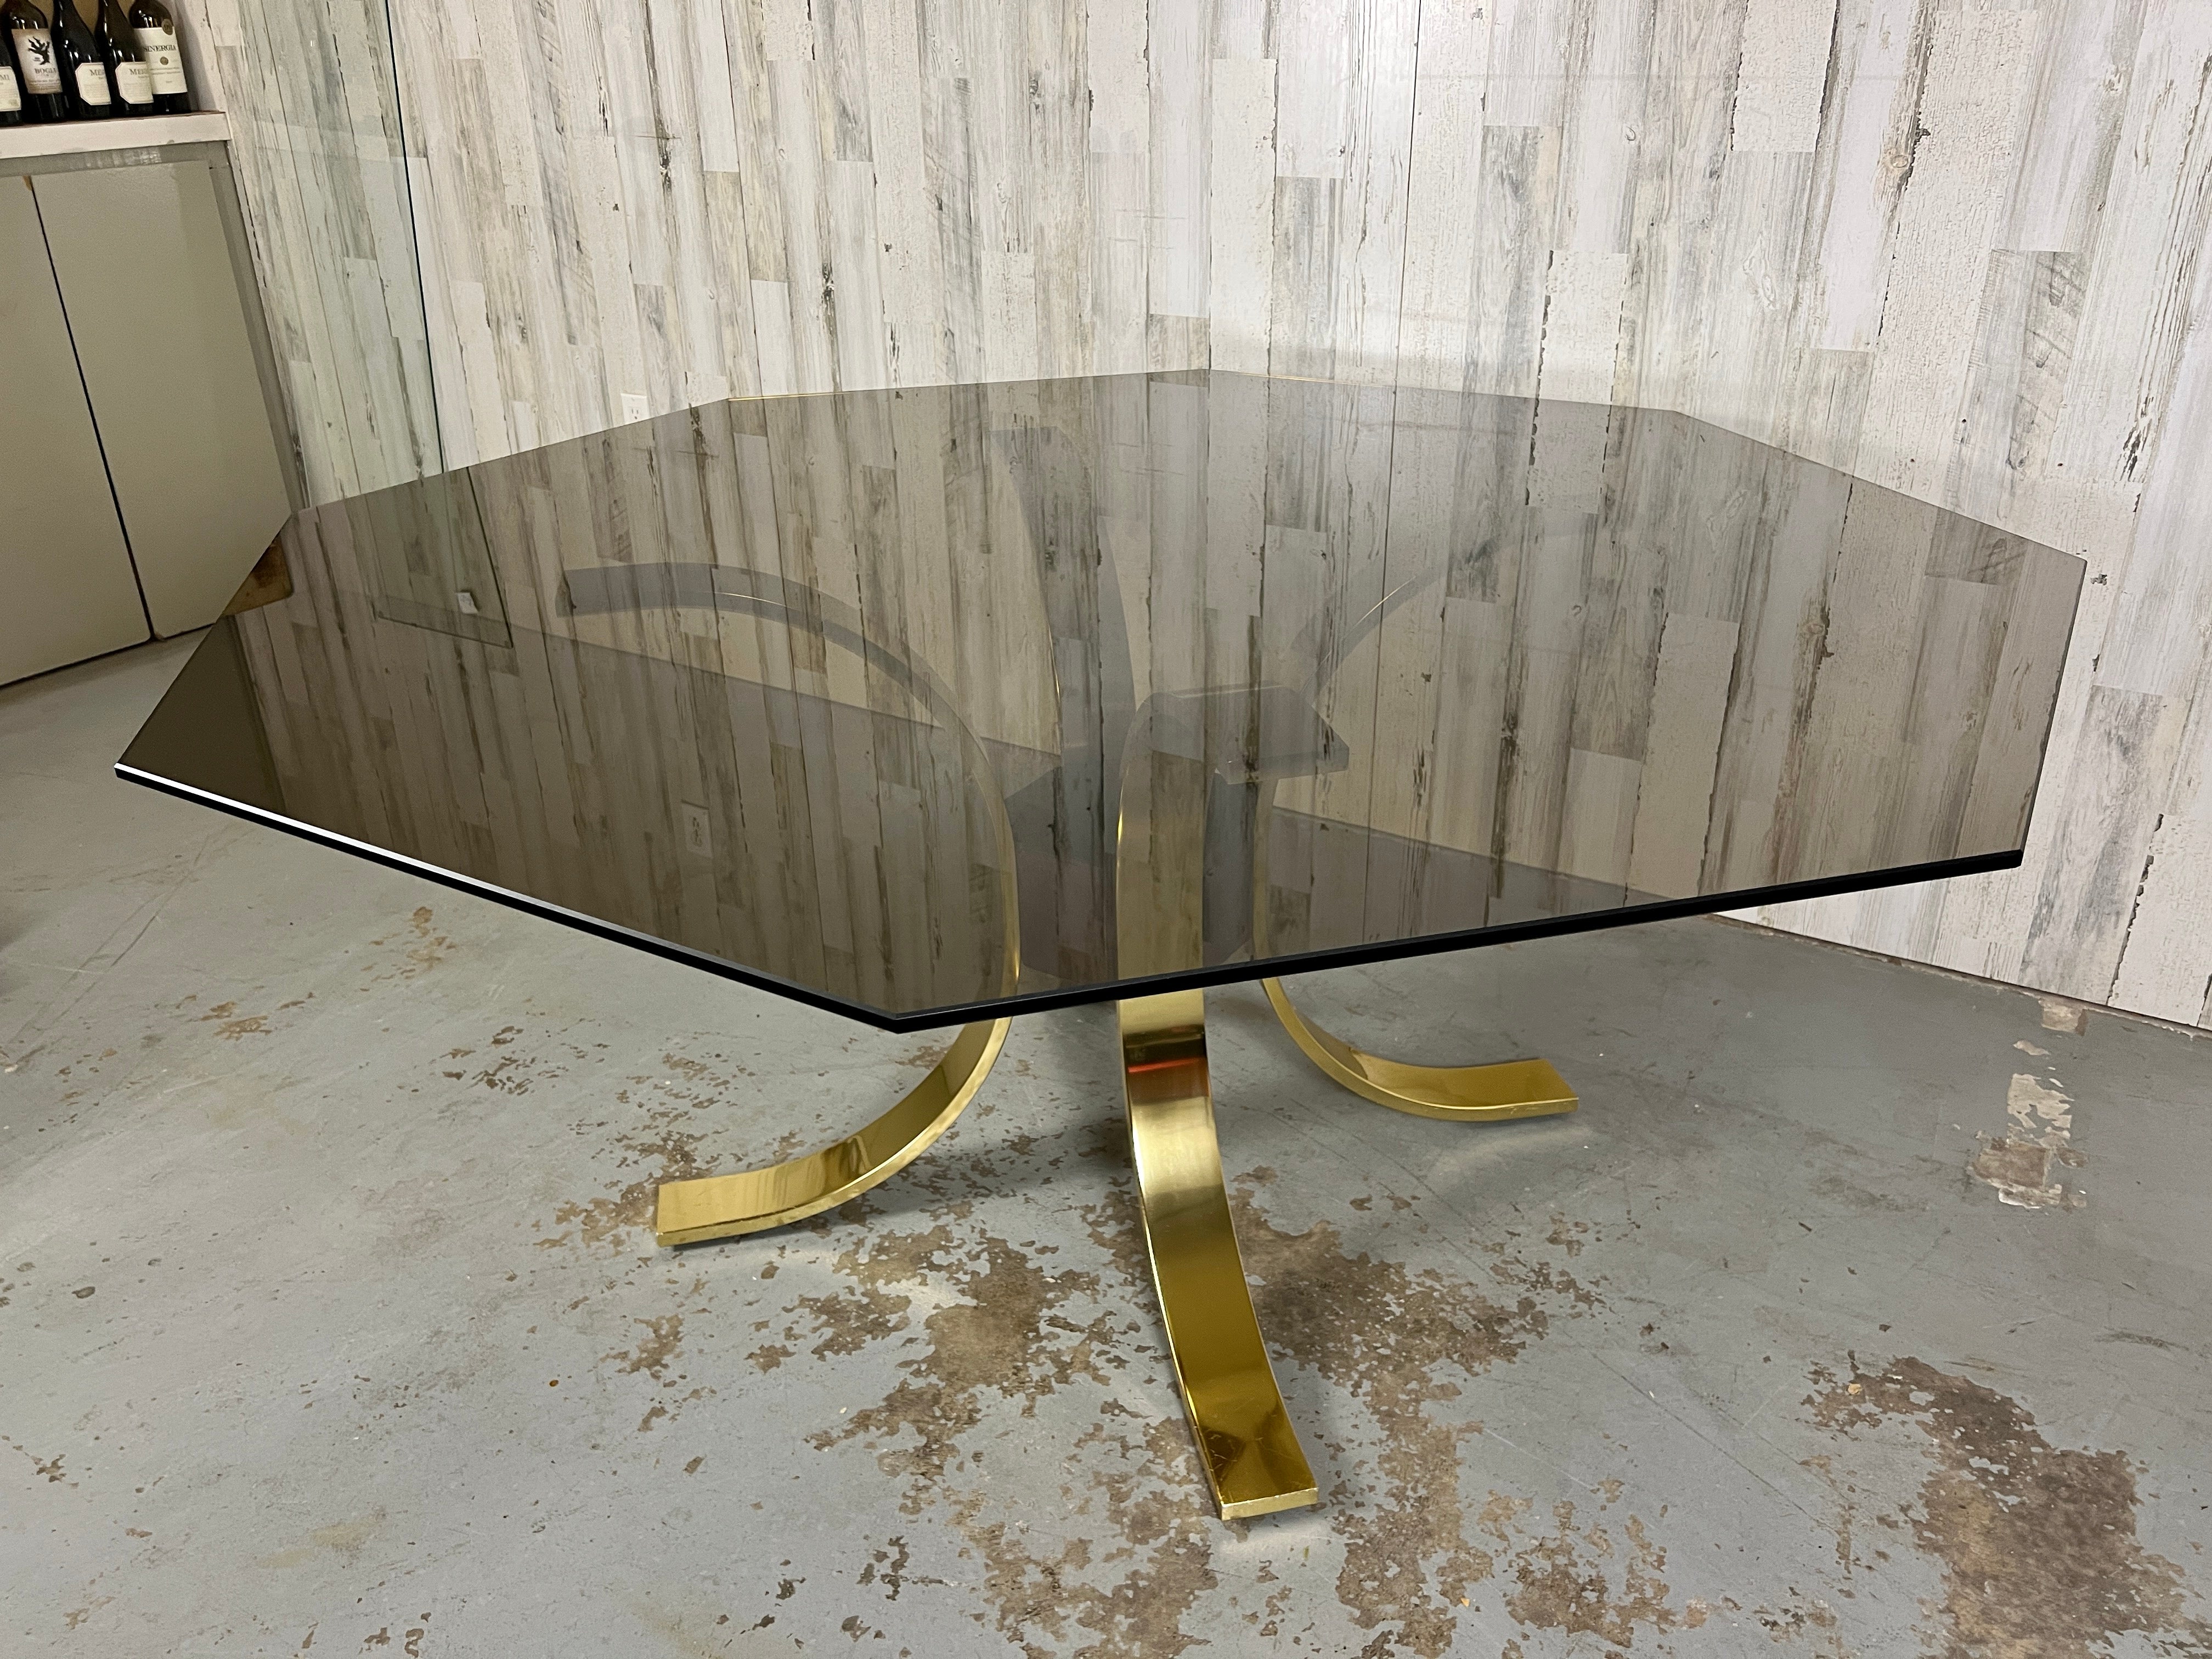 Brass, burl, & smoked octagonal shaped glass dining table by Mastercraft, Lotus design with four curved brass legs and a burl wood center hub with a octagonal smoked glass that rest on top. Very elegant combination.
Base only: 32 L x 32 W x 28.75 H.